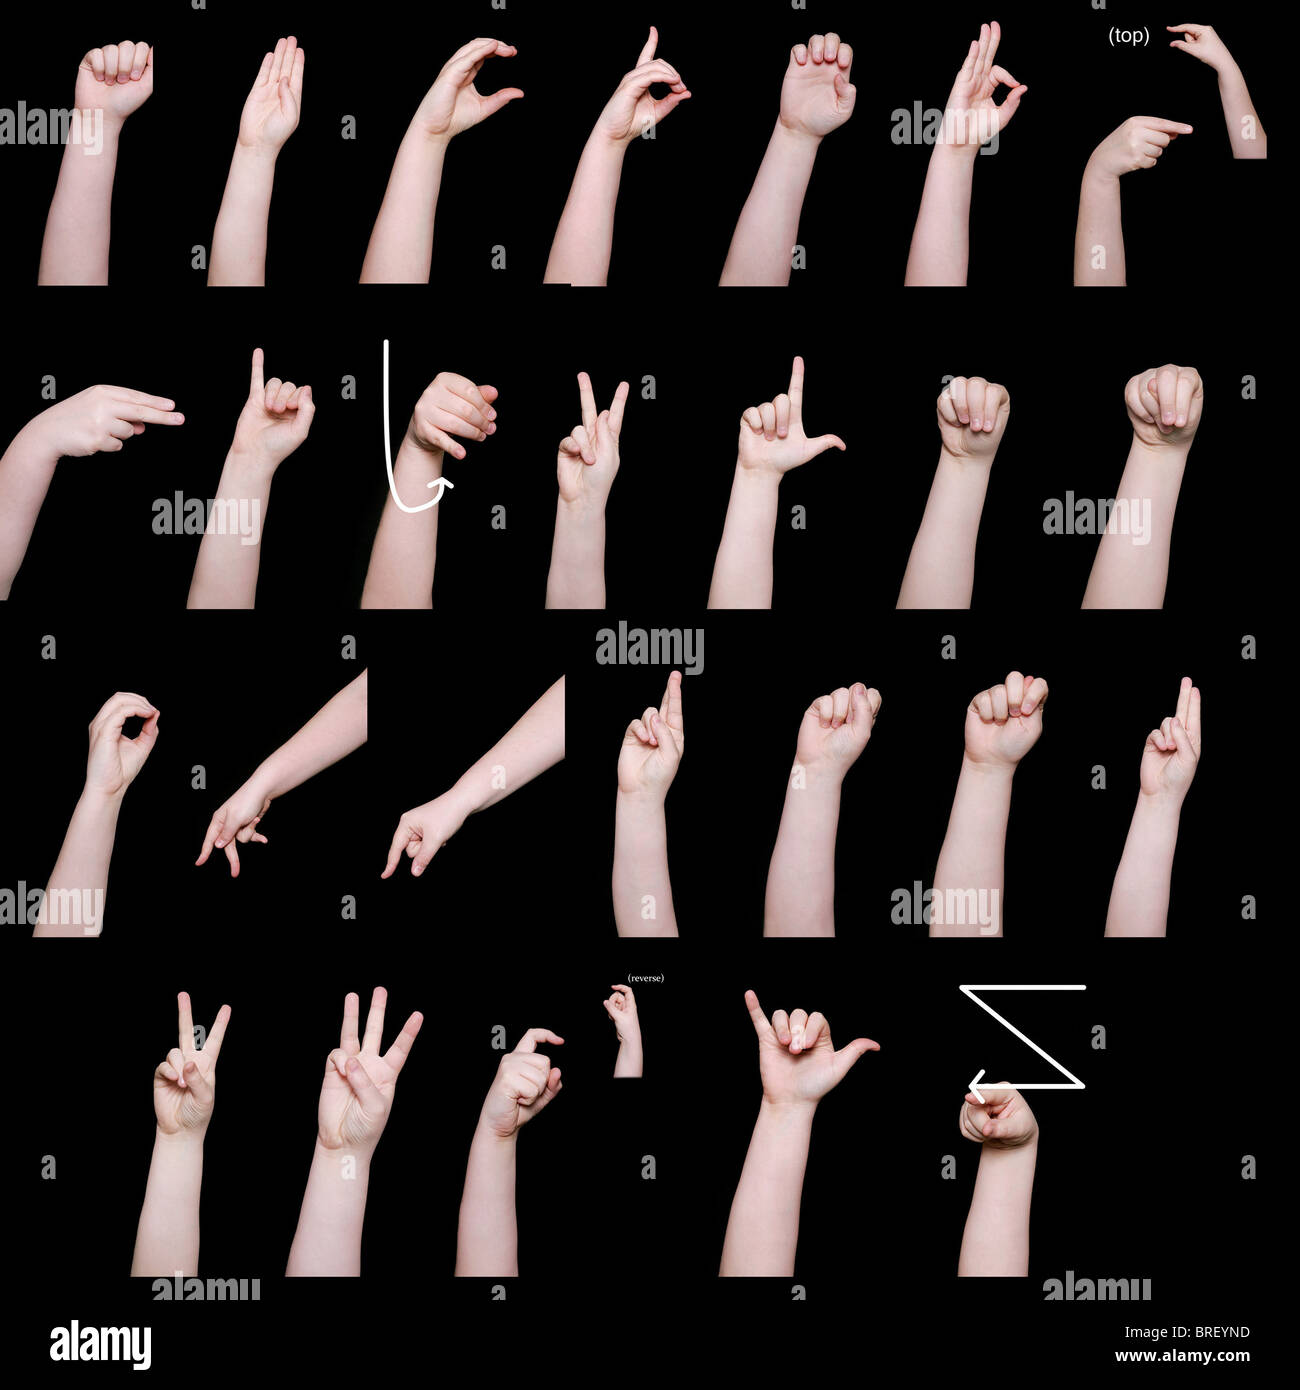 Every Letter Of The English Alphabet In American Sign Language As One Large Image Each Letter Also Available In Larger Size Stock Photo Alamy